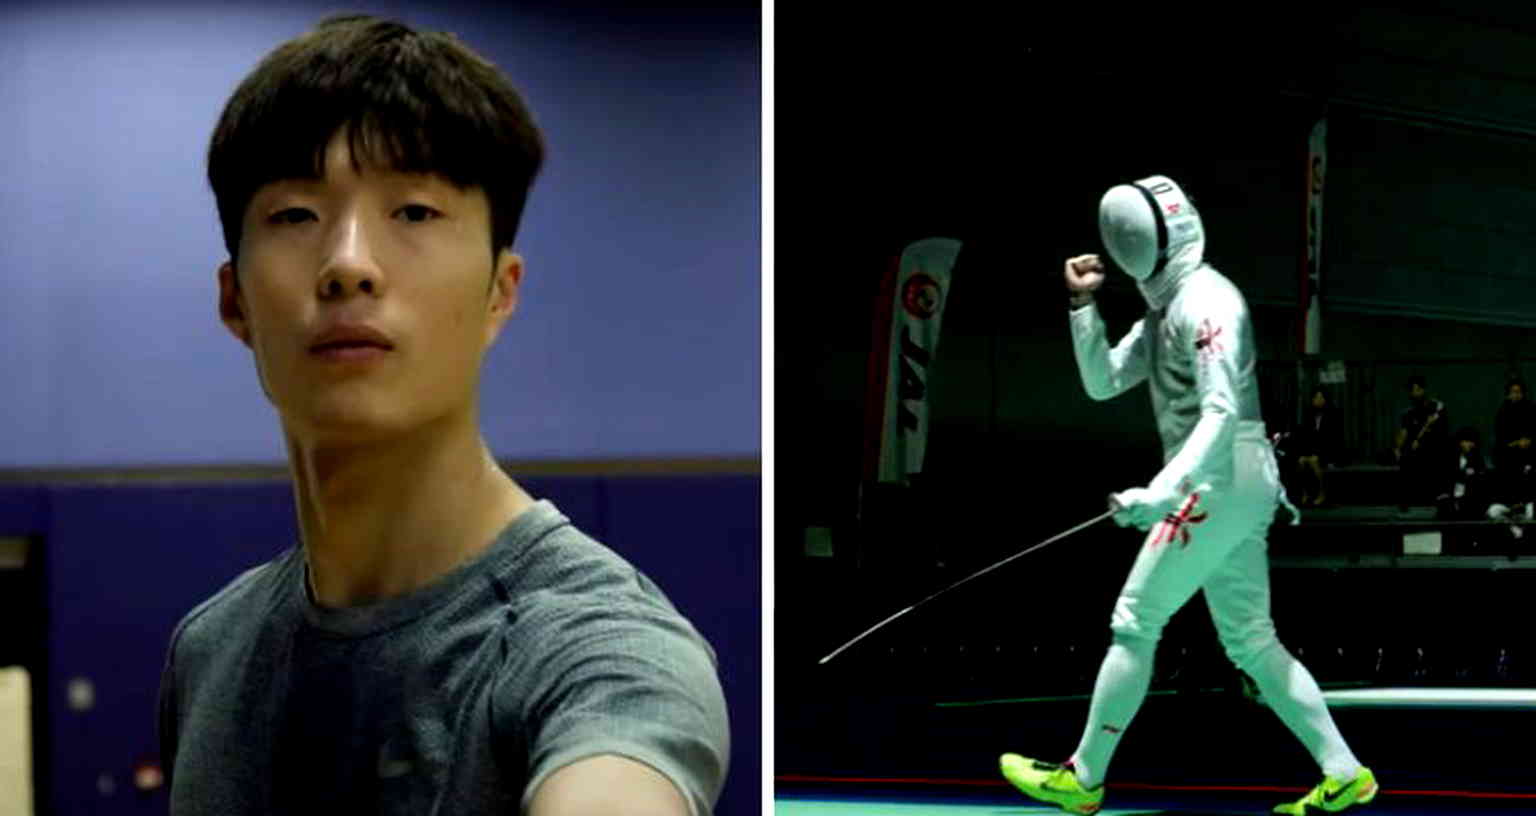 Fencer Edgar Cheung becomes Hong Kong’s first athlete to rank No. 1 in the world in men’s foil